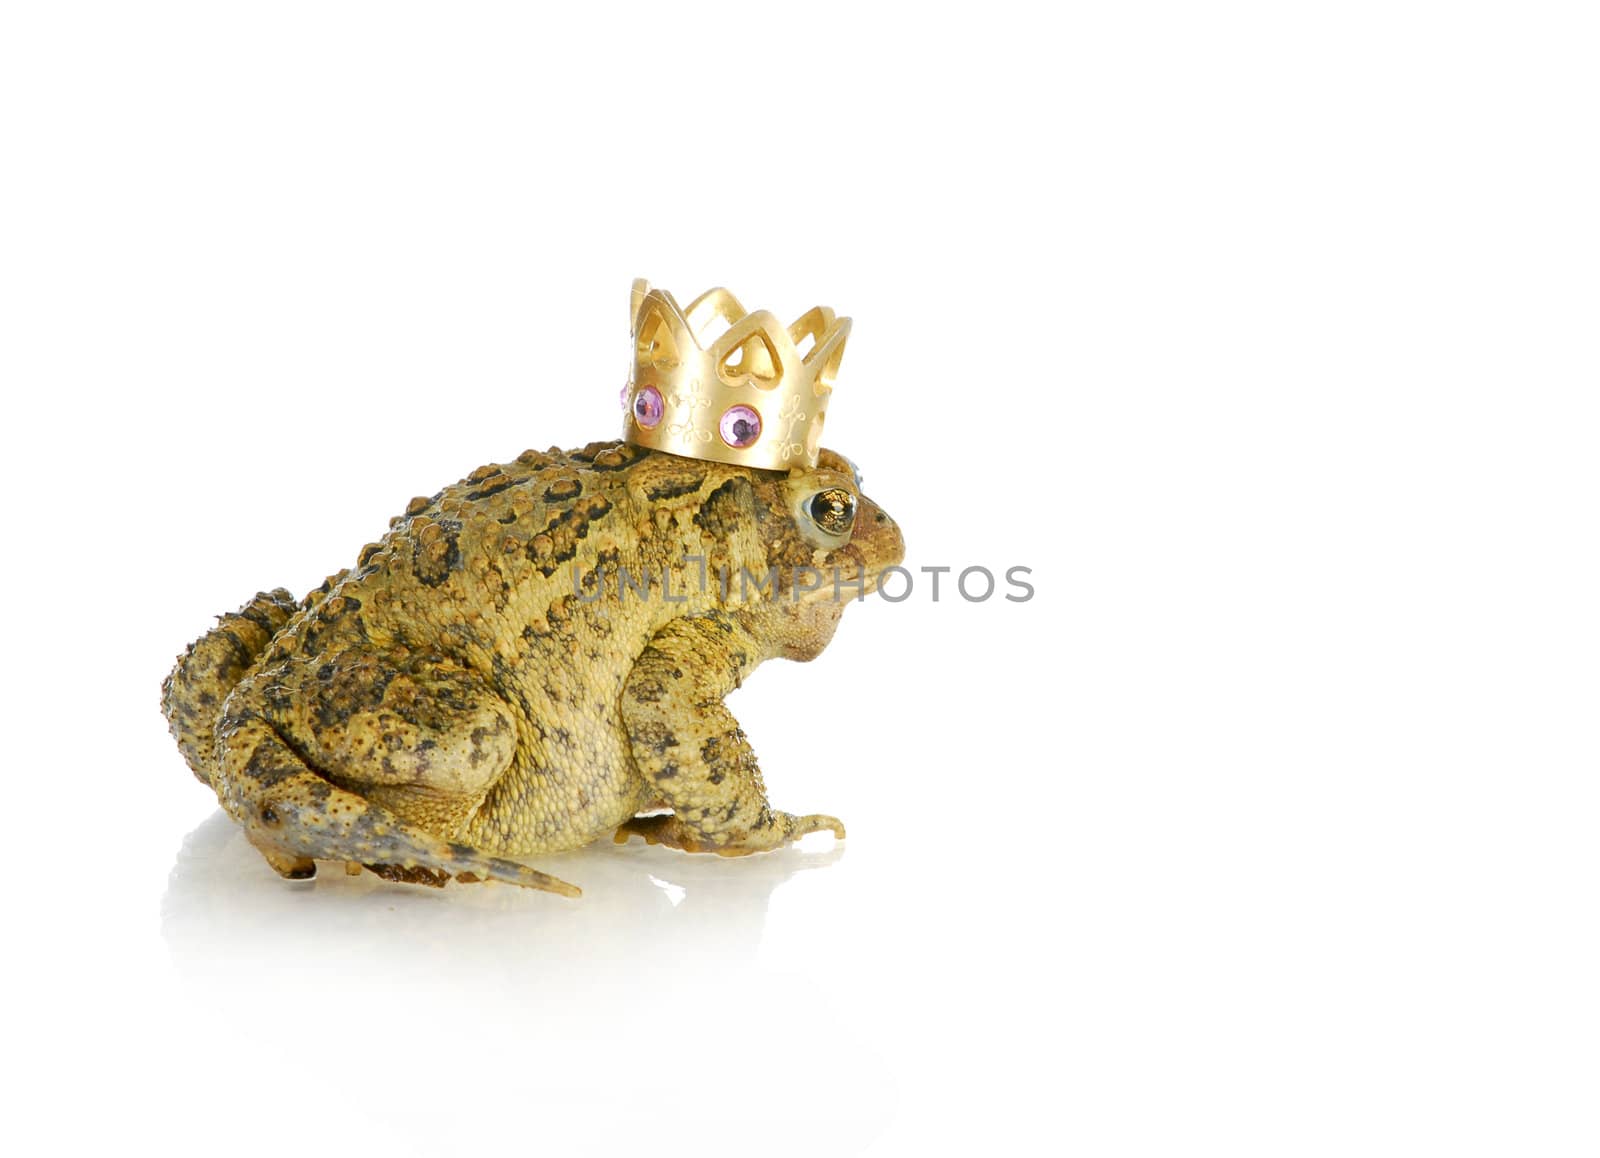 toad prince - toad wearing a gold jewelled crown on white background